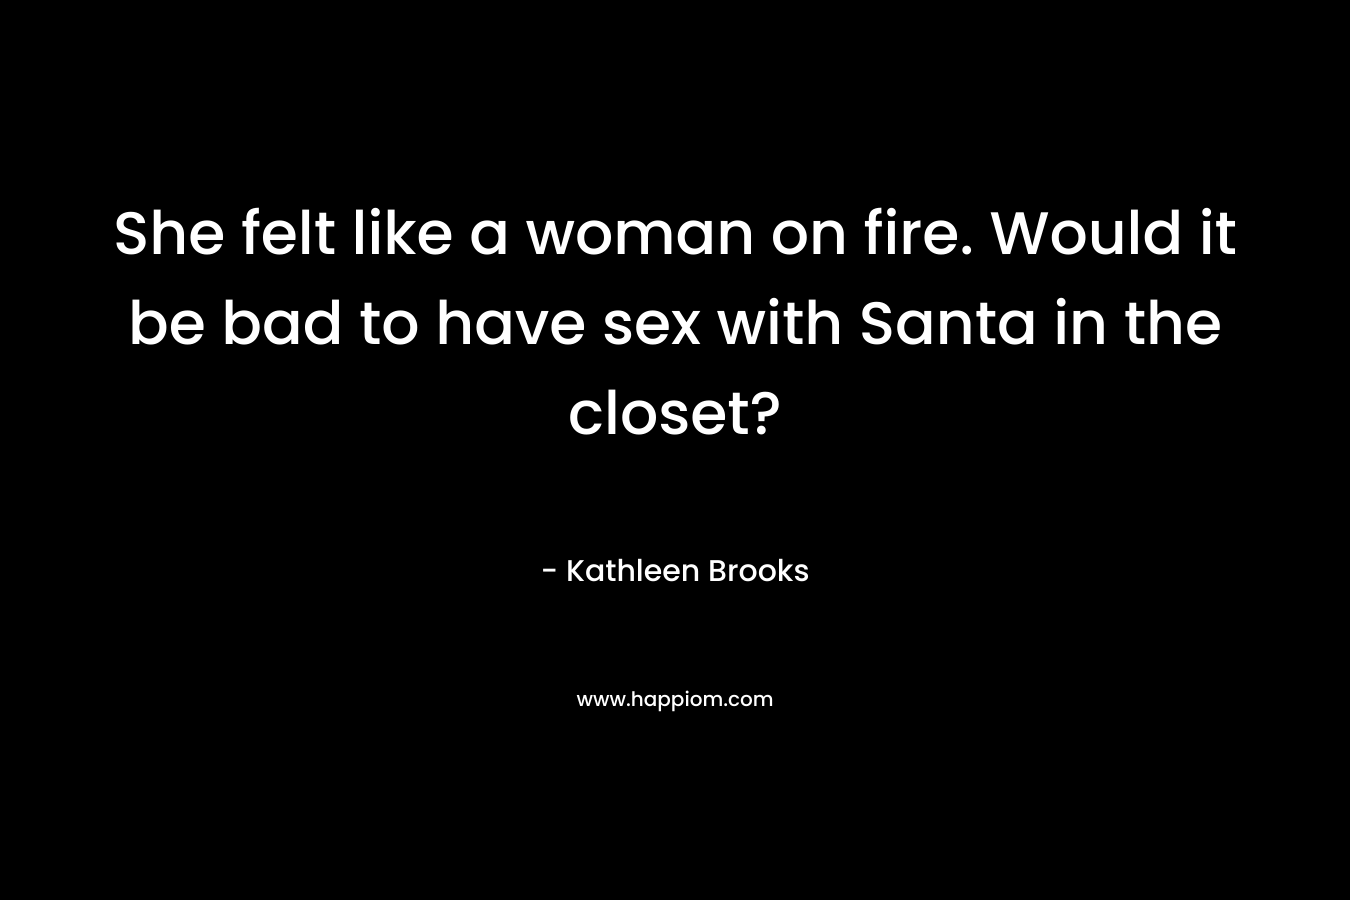 She felt like a woman on fire. Would it be bad to have sex with Santa in the closet? – Kathleen Brooks